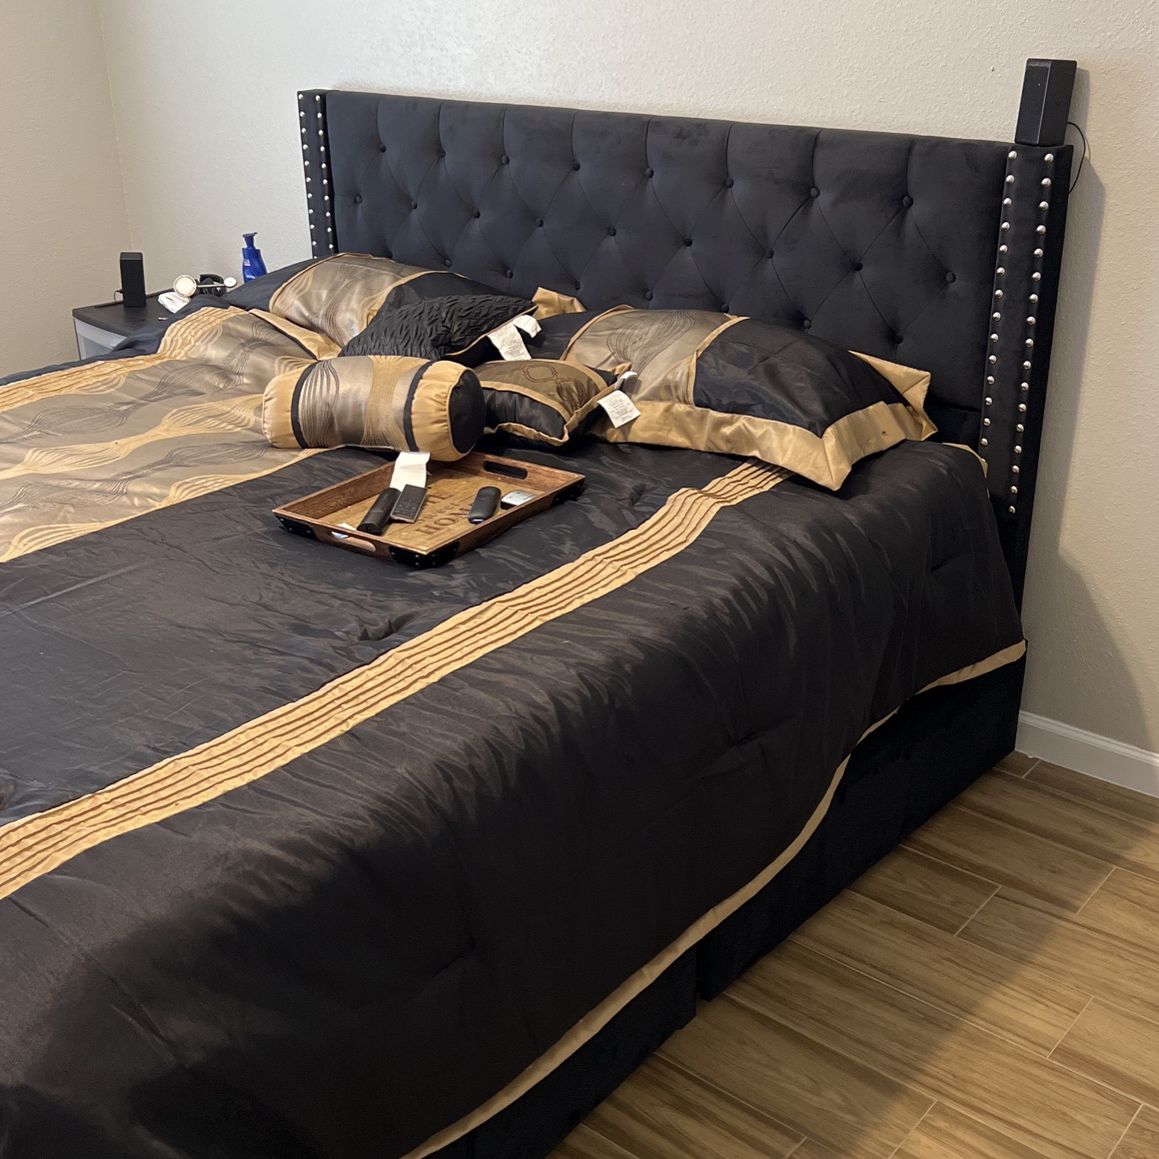 King Bed Brand New $300